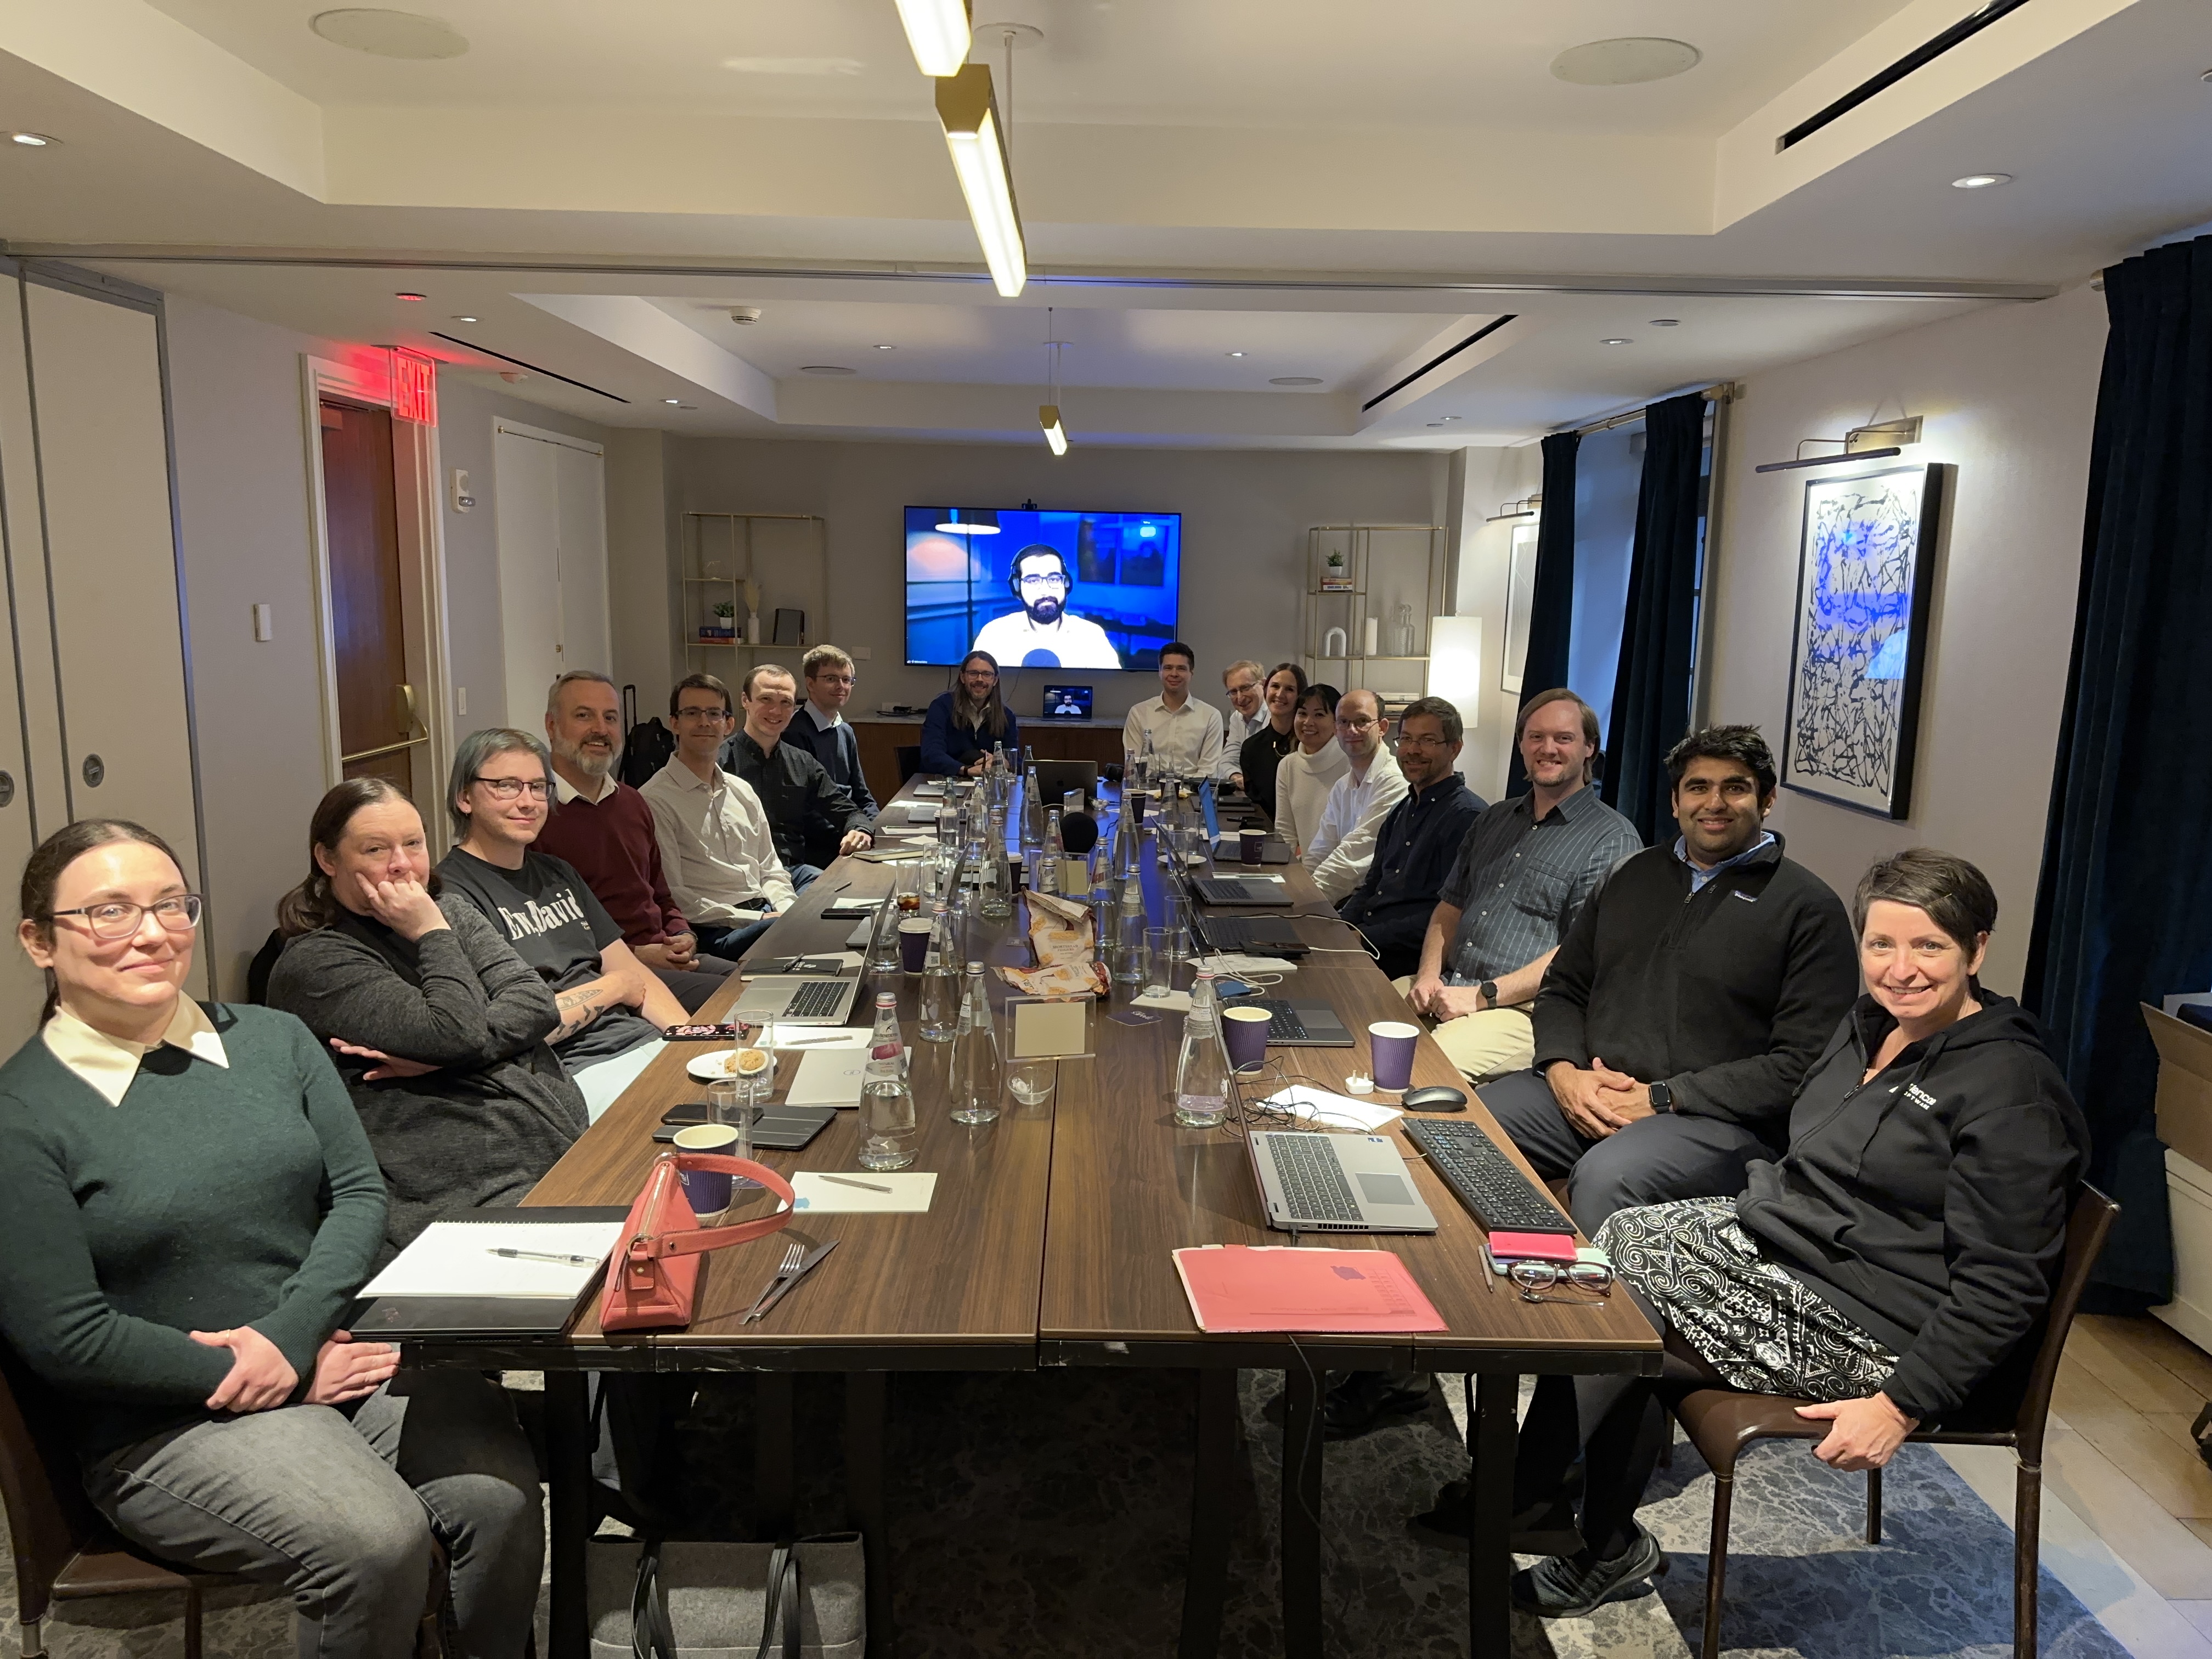 The Glencoe Software team gathered in-person to strategize on the next big challenges in image data management.